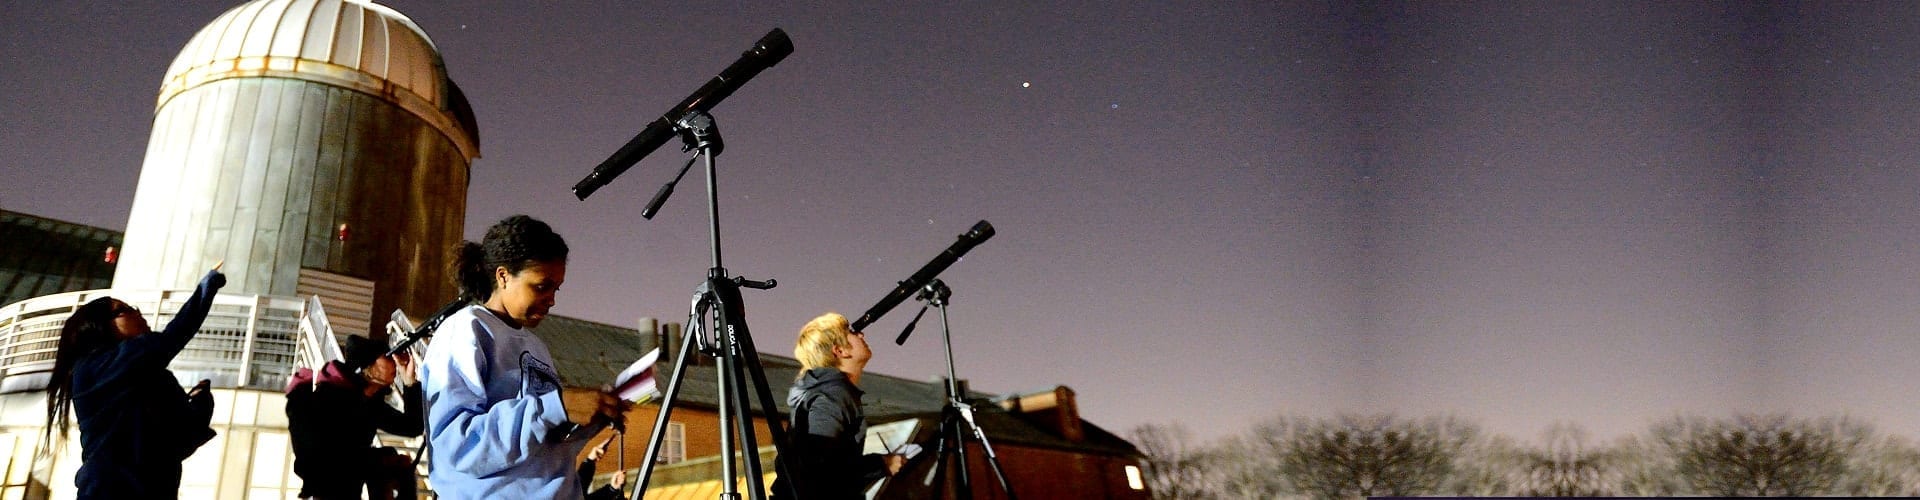 several students with telescopes on a roof at night looking at stars